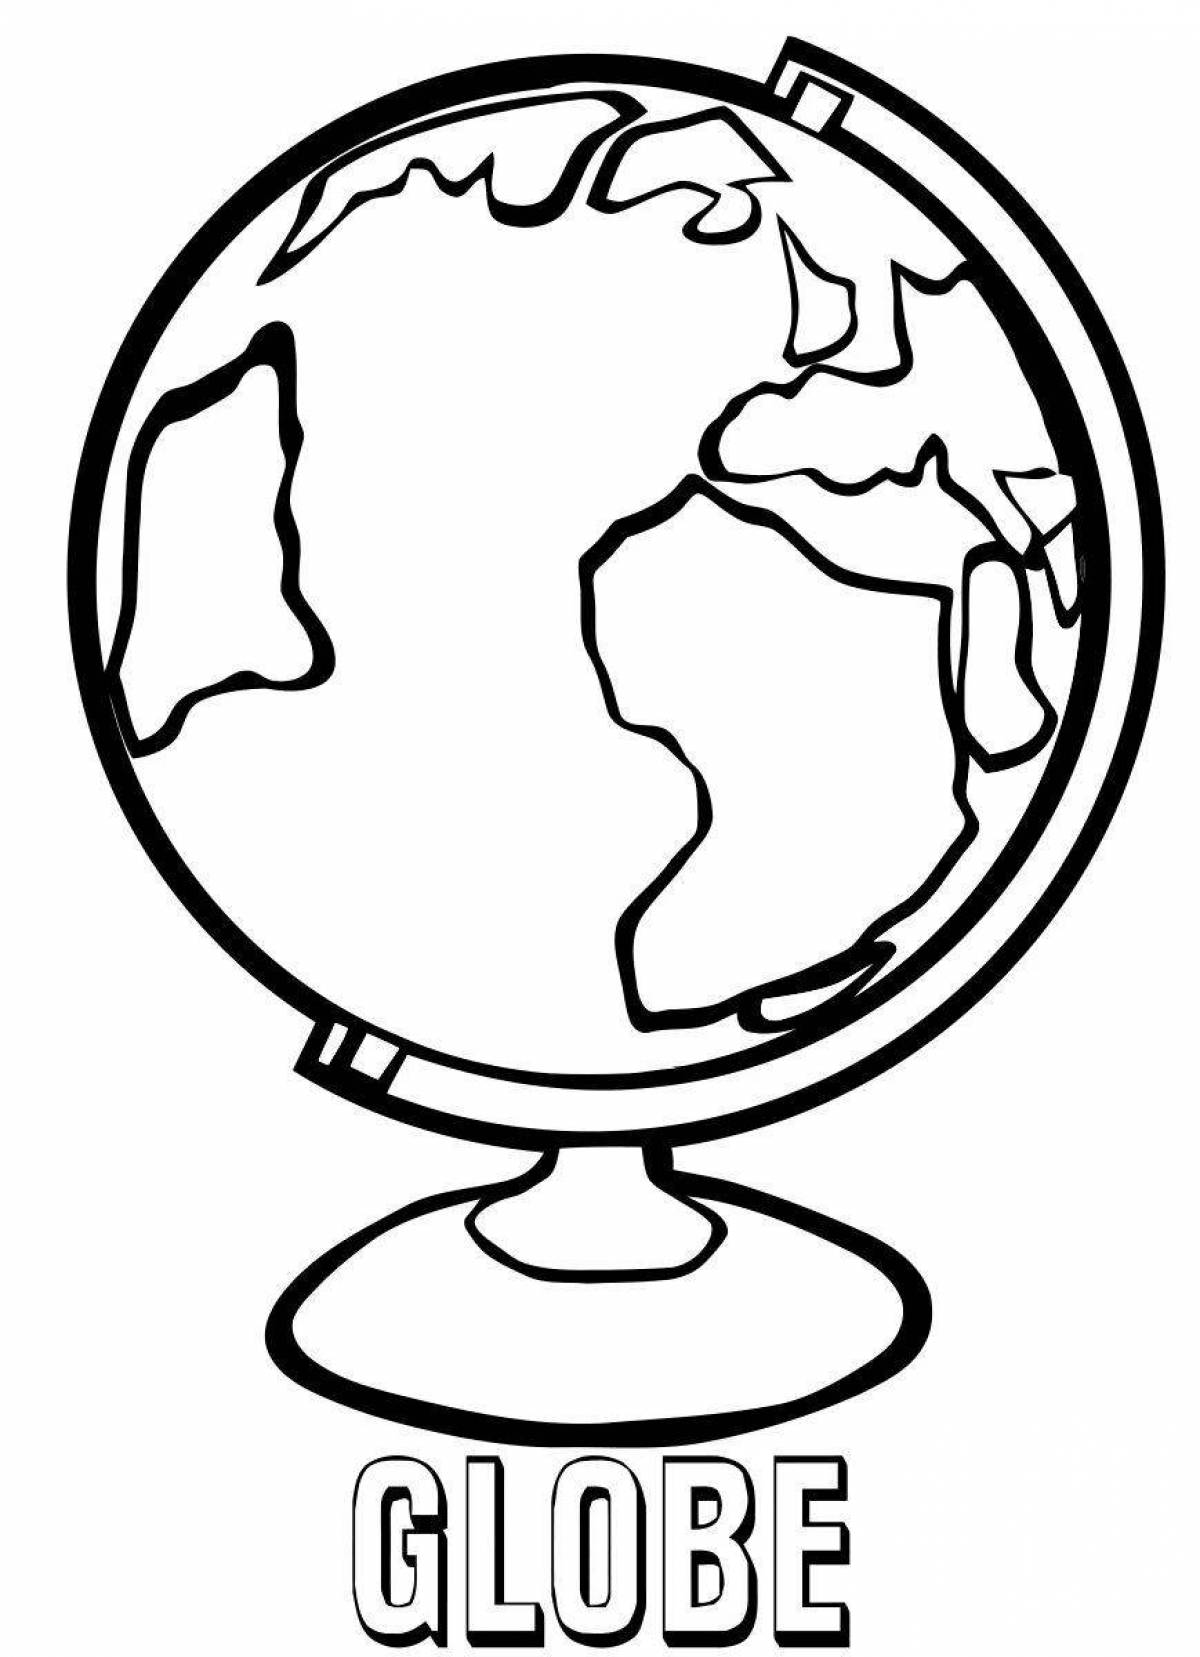 Great globe coloring page